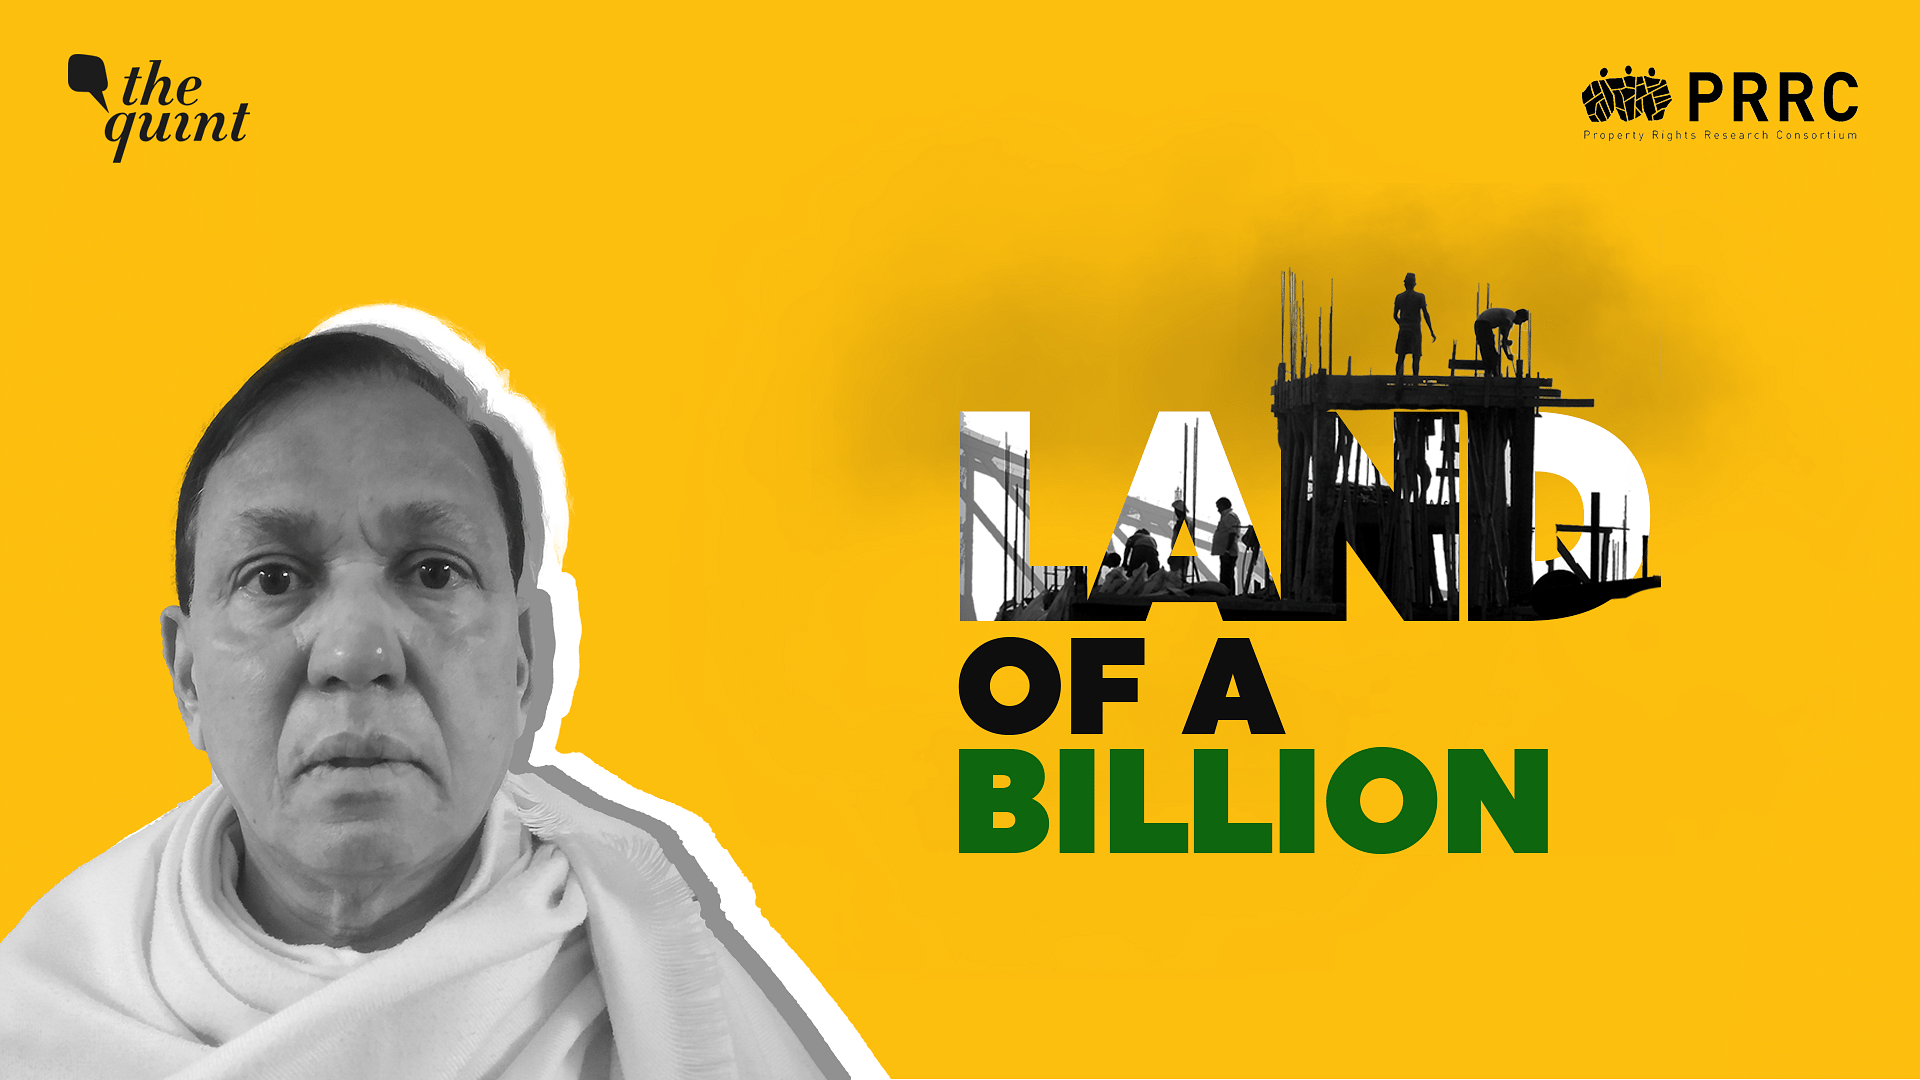 In this episode of the ‘Land of a Billion’ podcast, we speak with Dr T Haque, one of the leading agricultural economists in our country, who was most recently head of the land policy cell in the NITI Aayog.